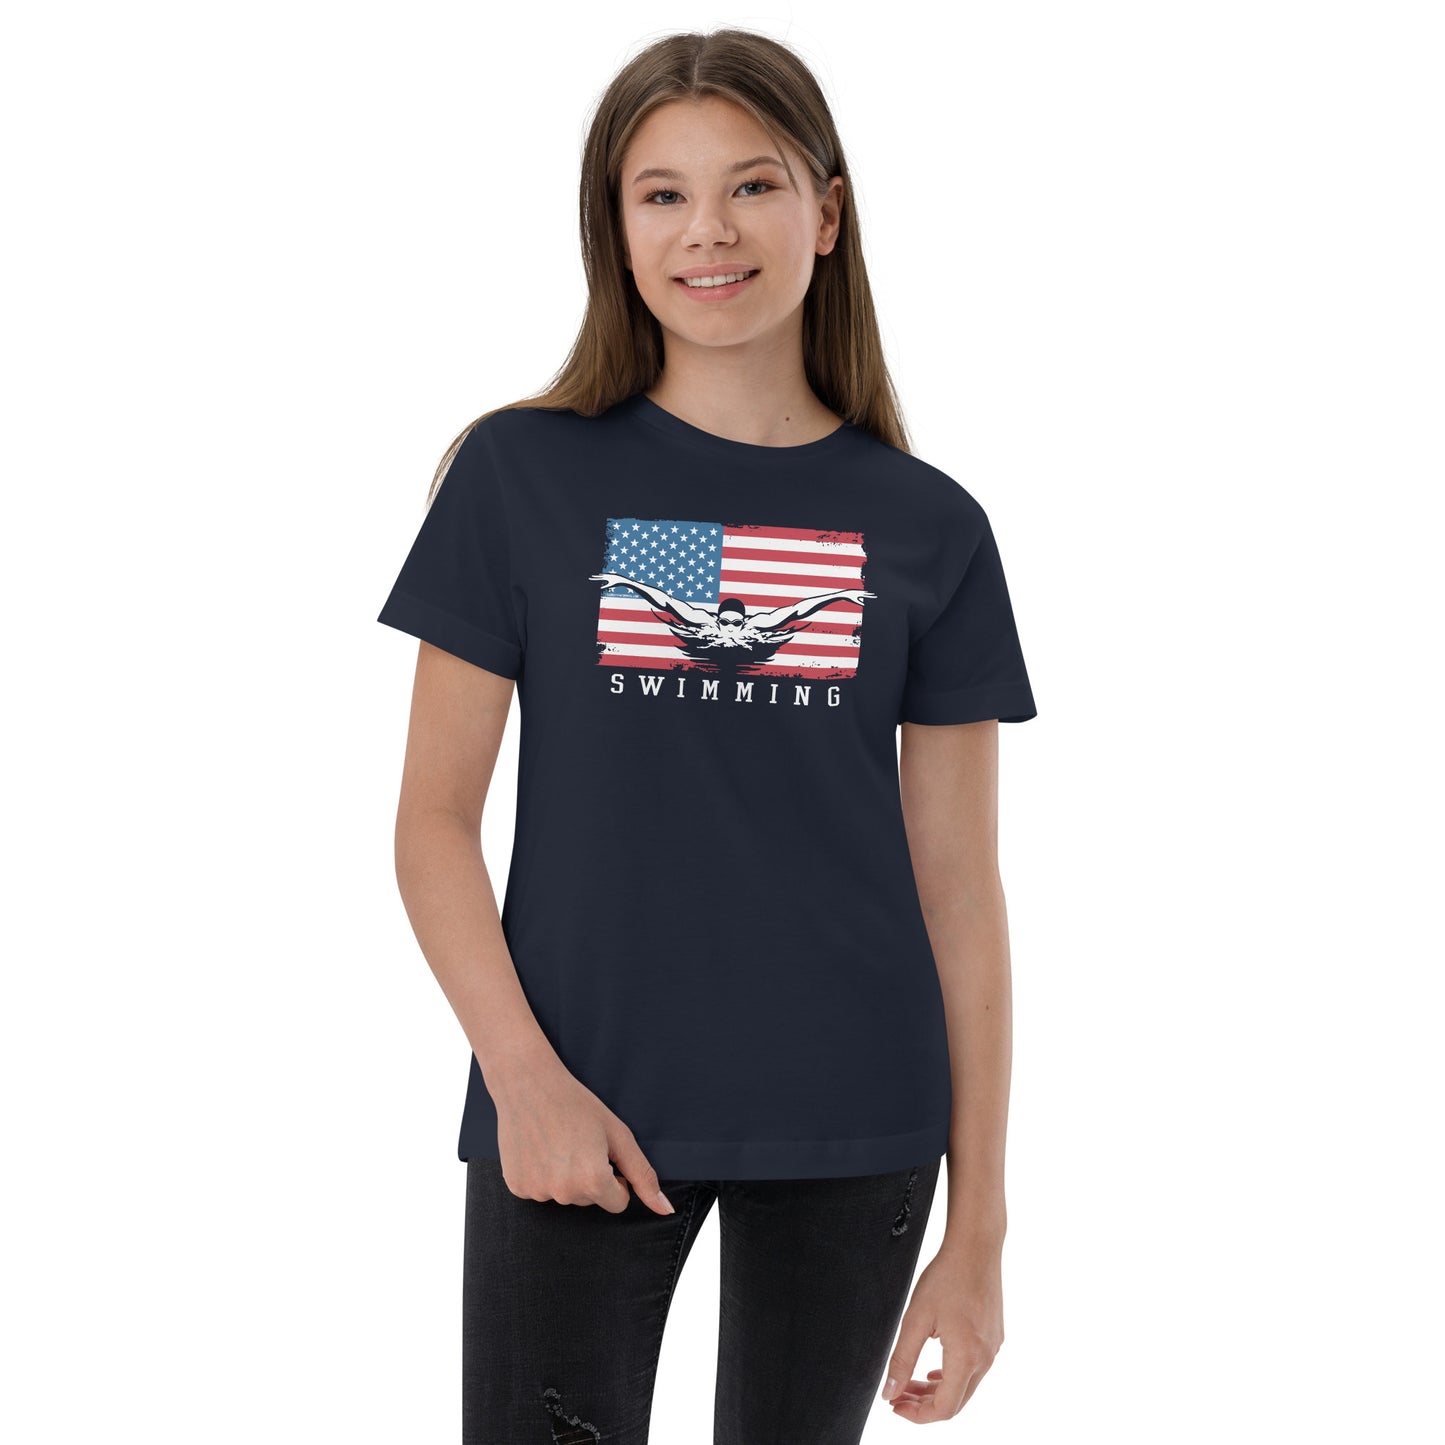 Youth Swimming USA T-shirt - TrendySwimmer